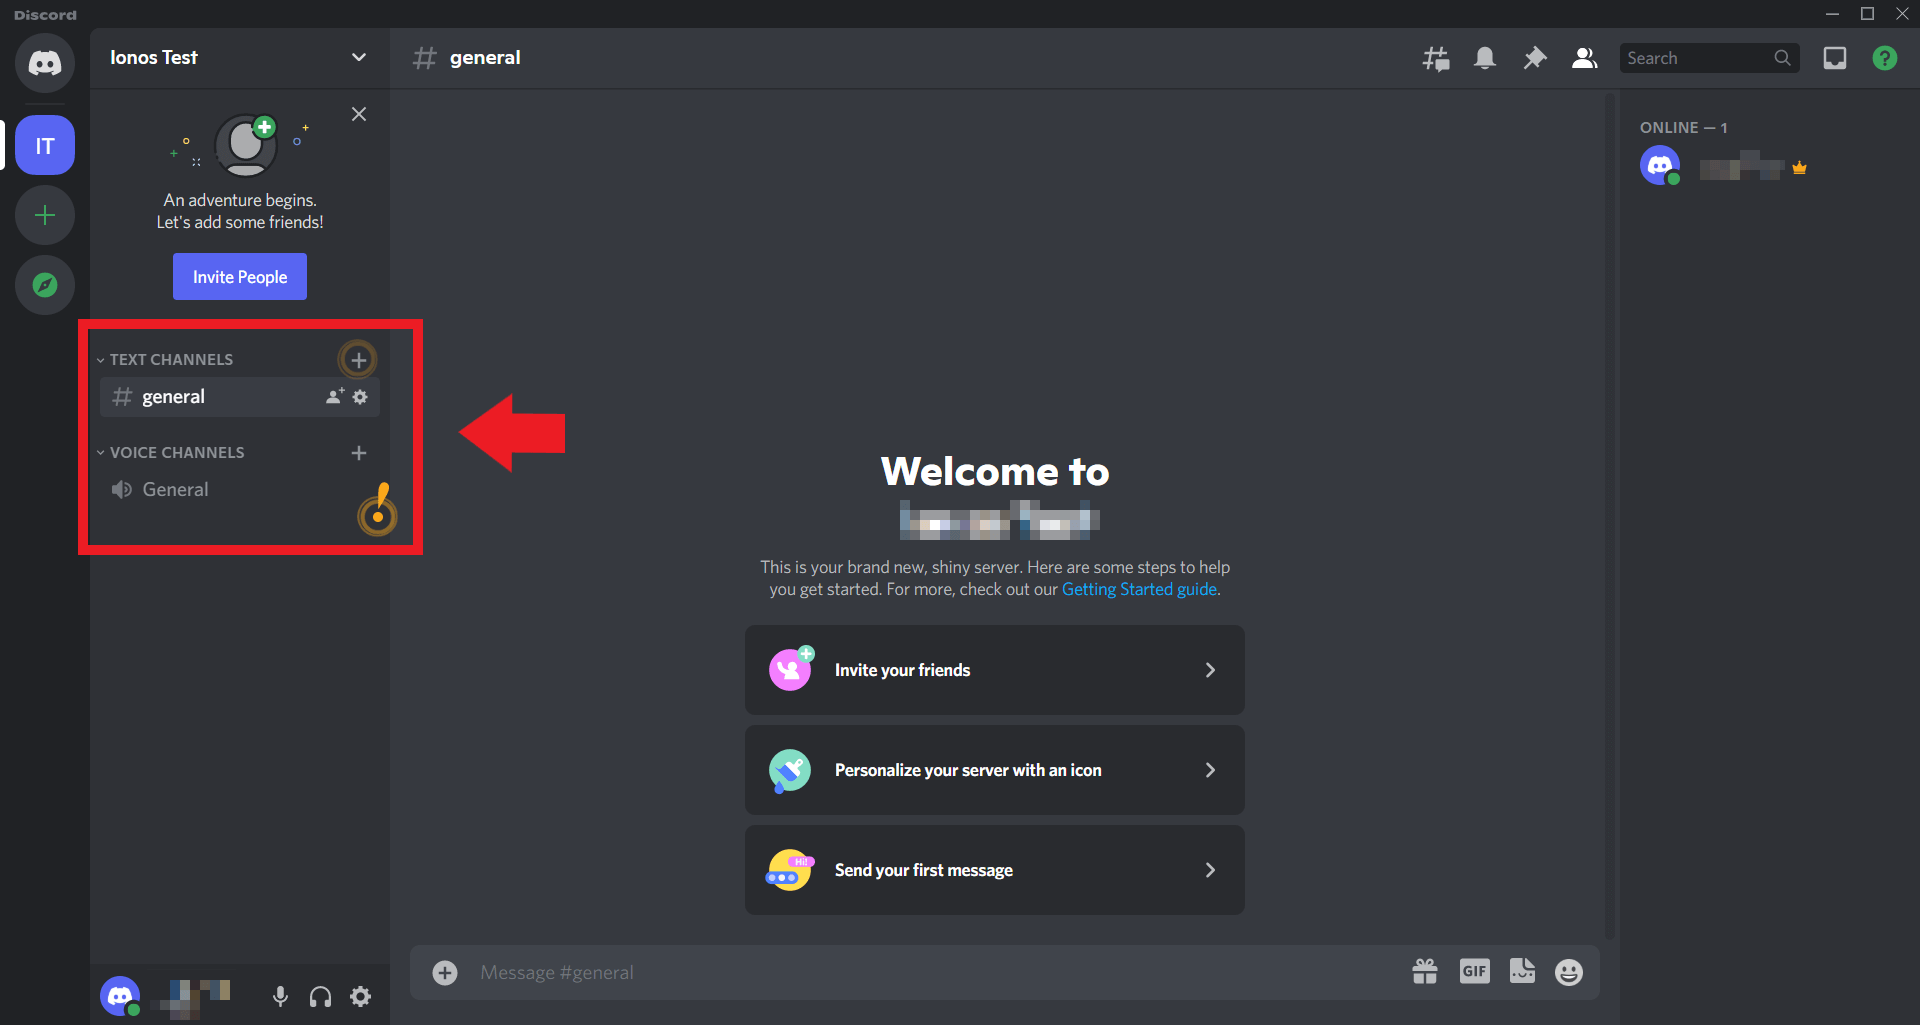 Why we use Discord